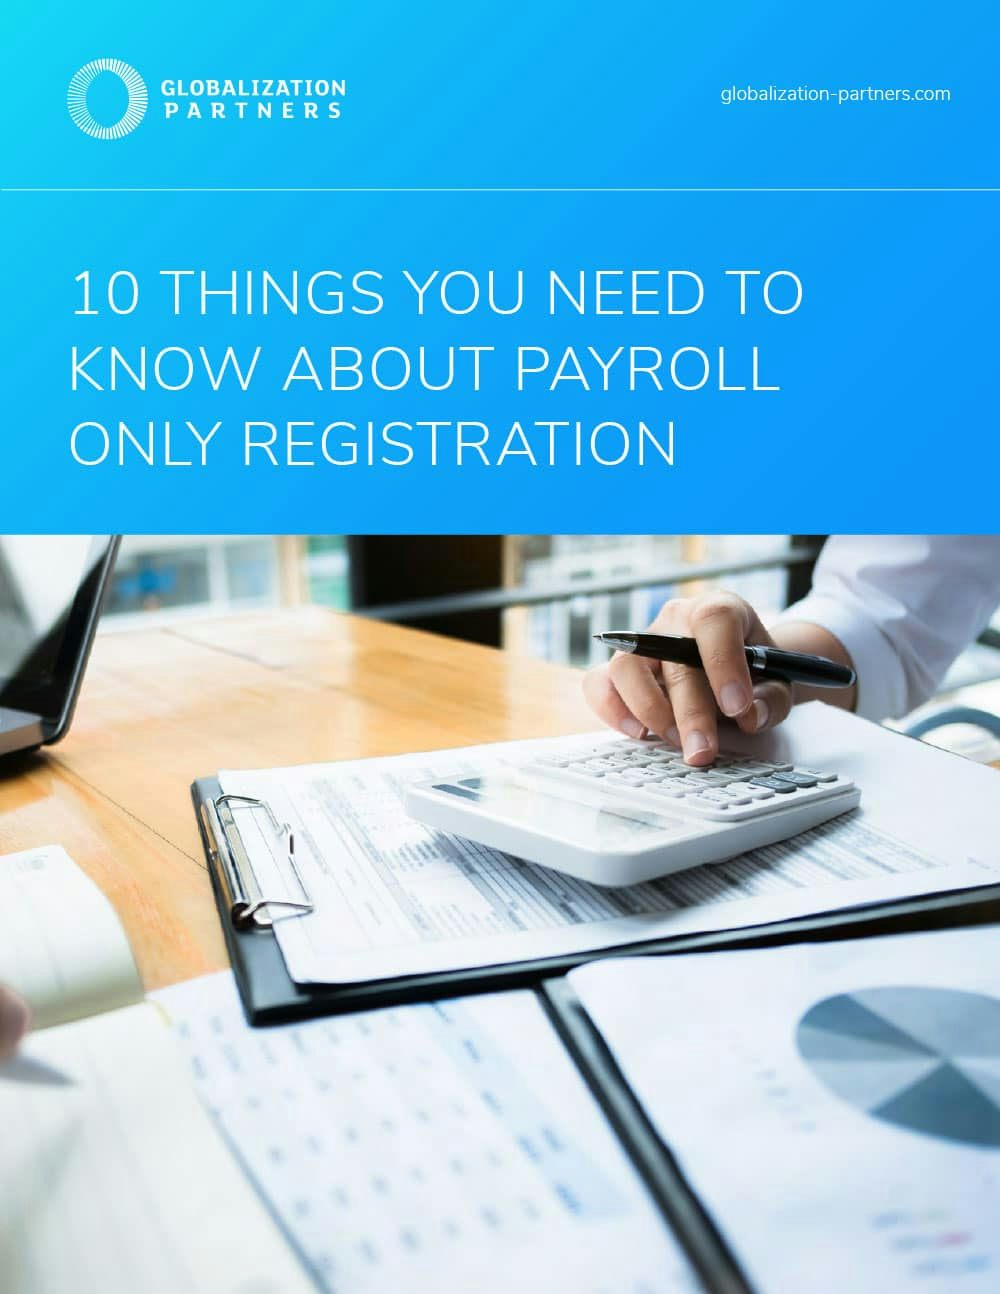 10-things-you-need-to-know-about-payroll-only-registration-ebook-cover.jpg